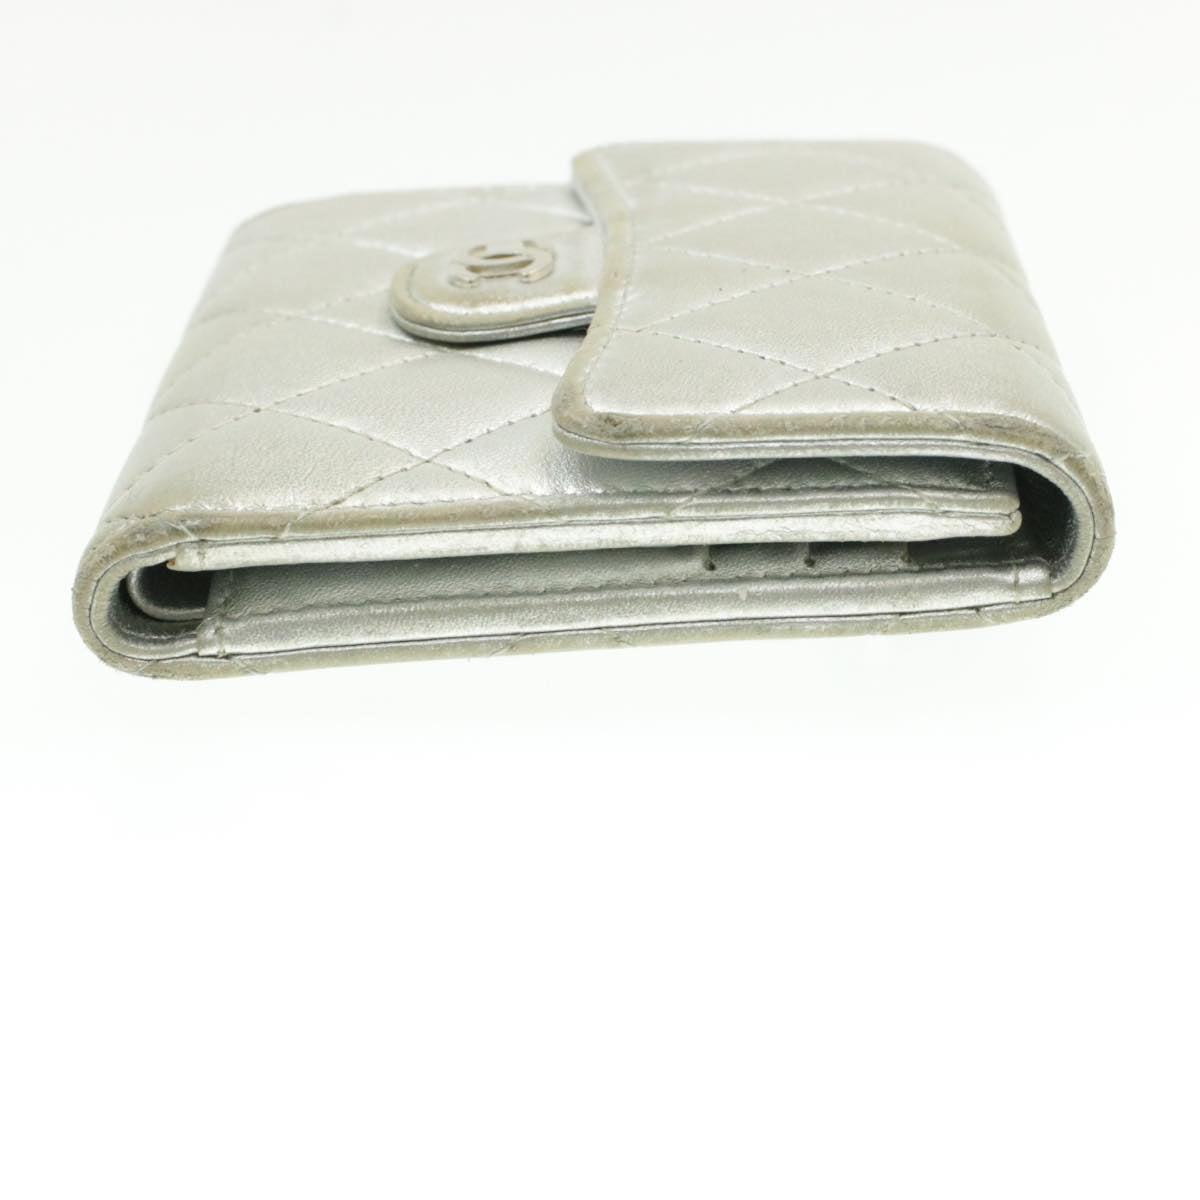 CHANEL Matelasse Bifold Wallet Silver CC Auth cr620